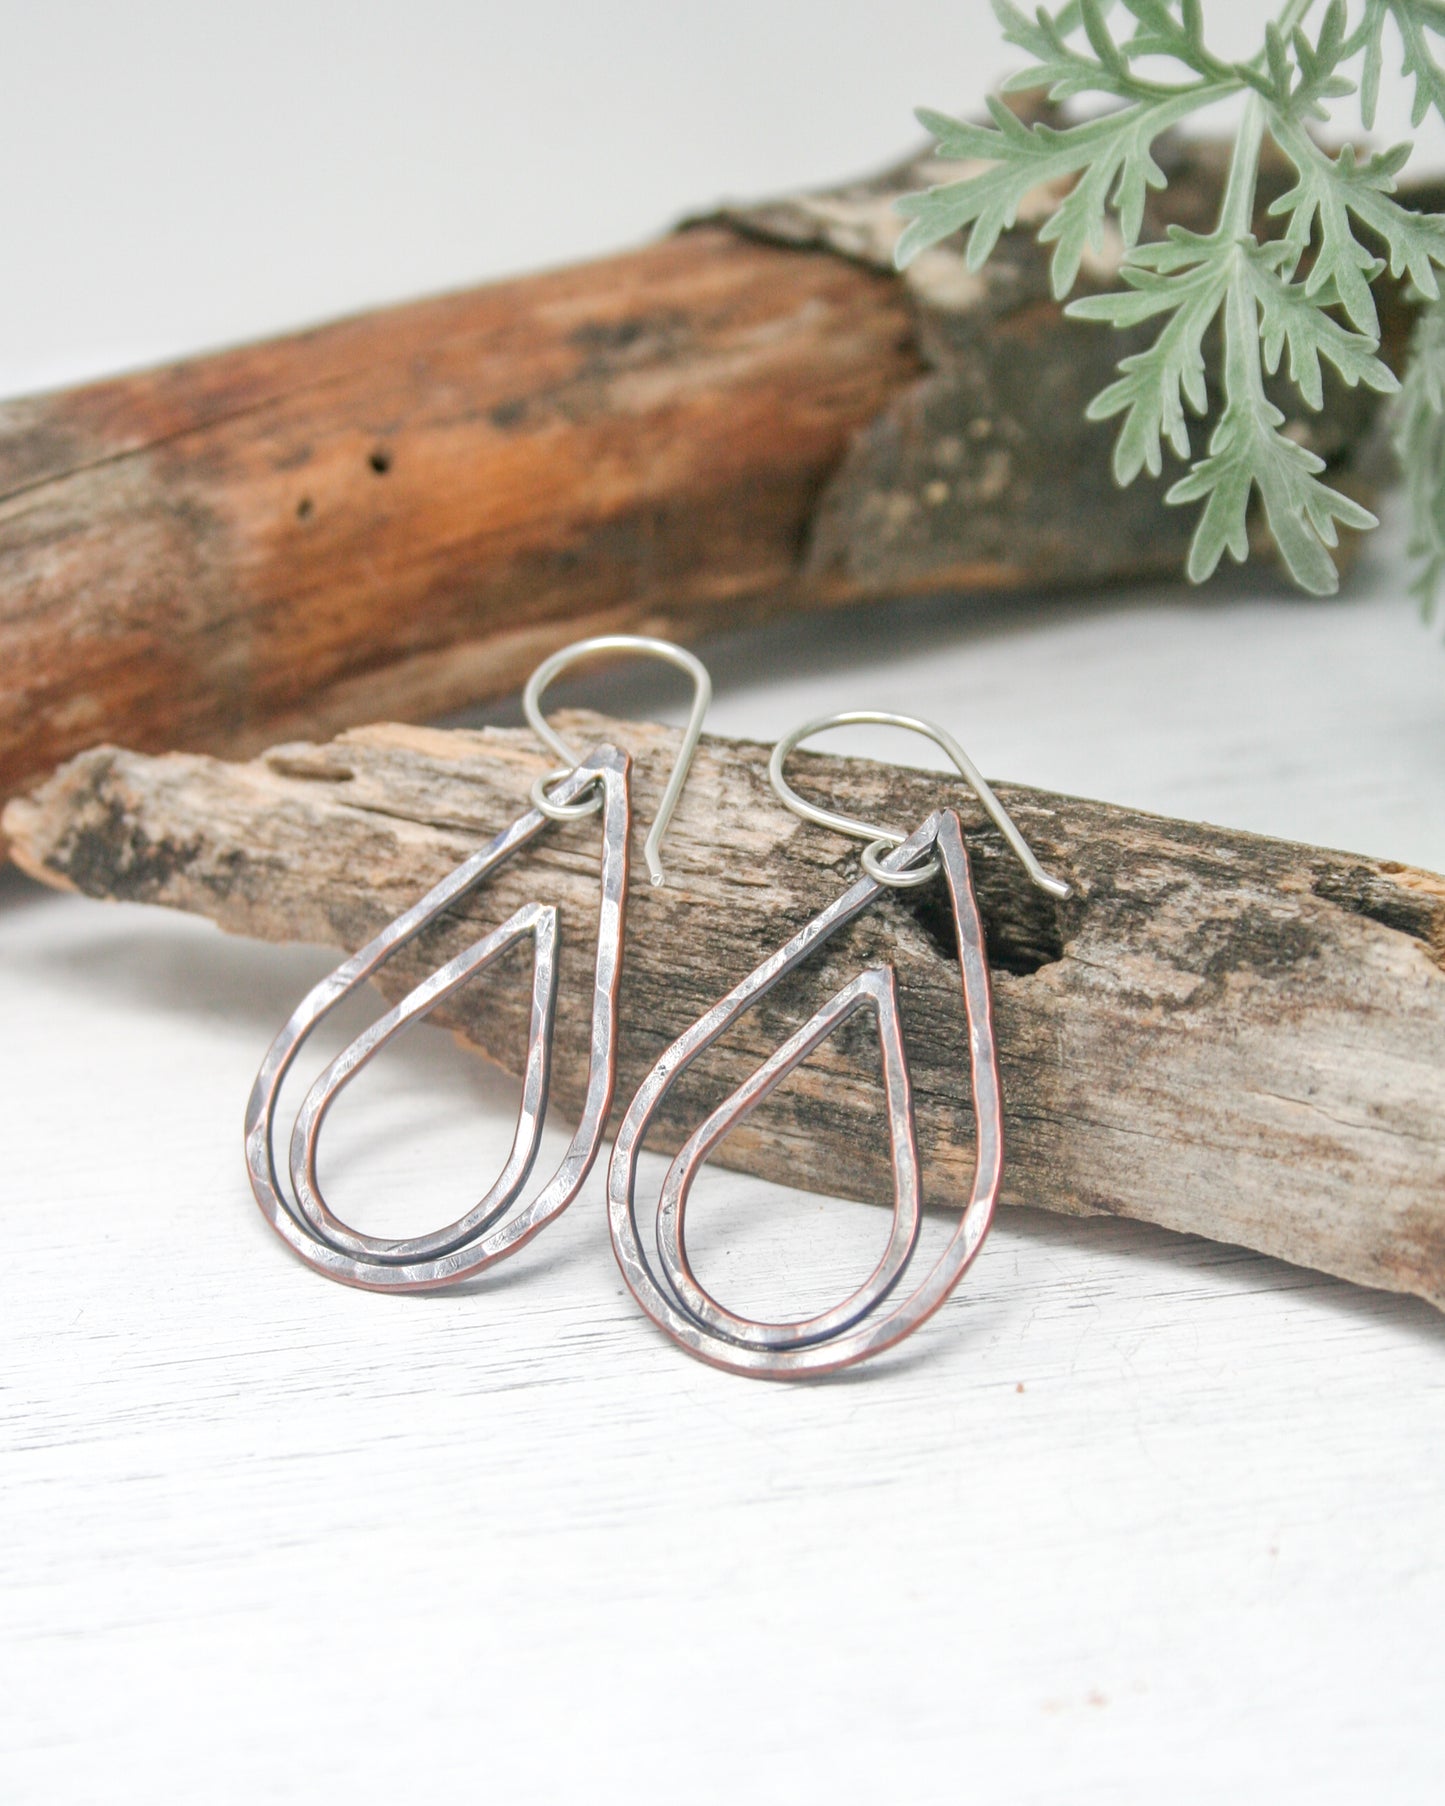 Forged Silhouette Hoop earrings -Dew Drop [ready to ship]